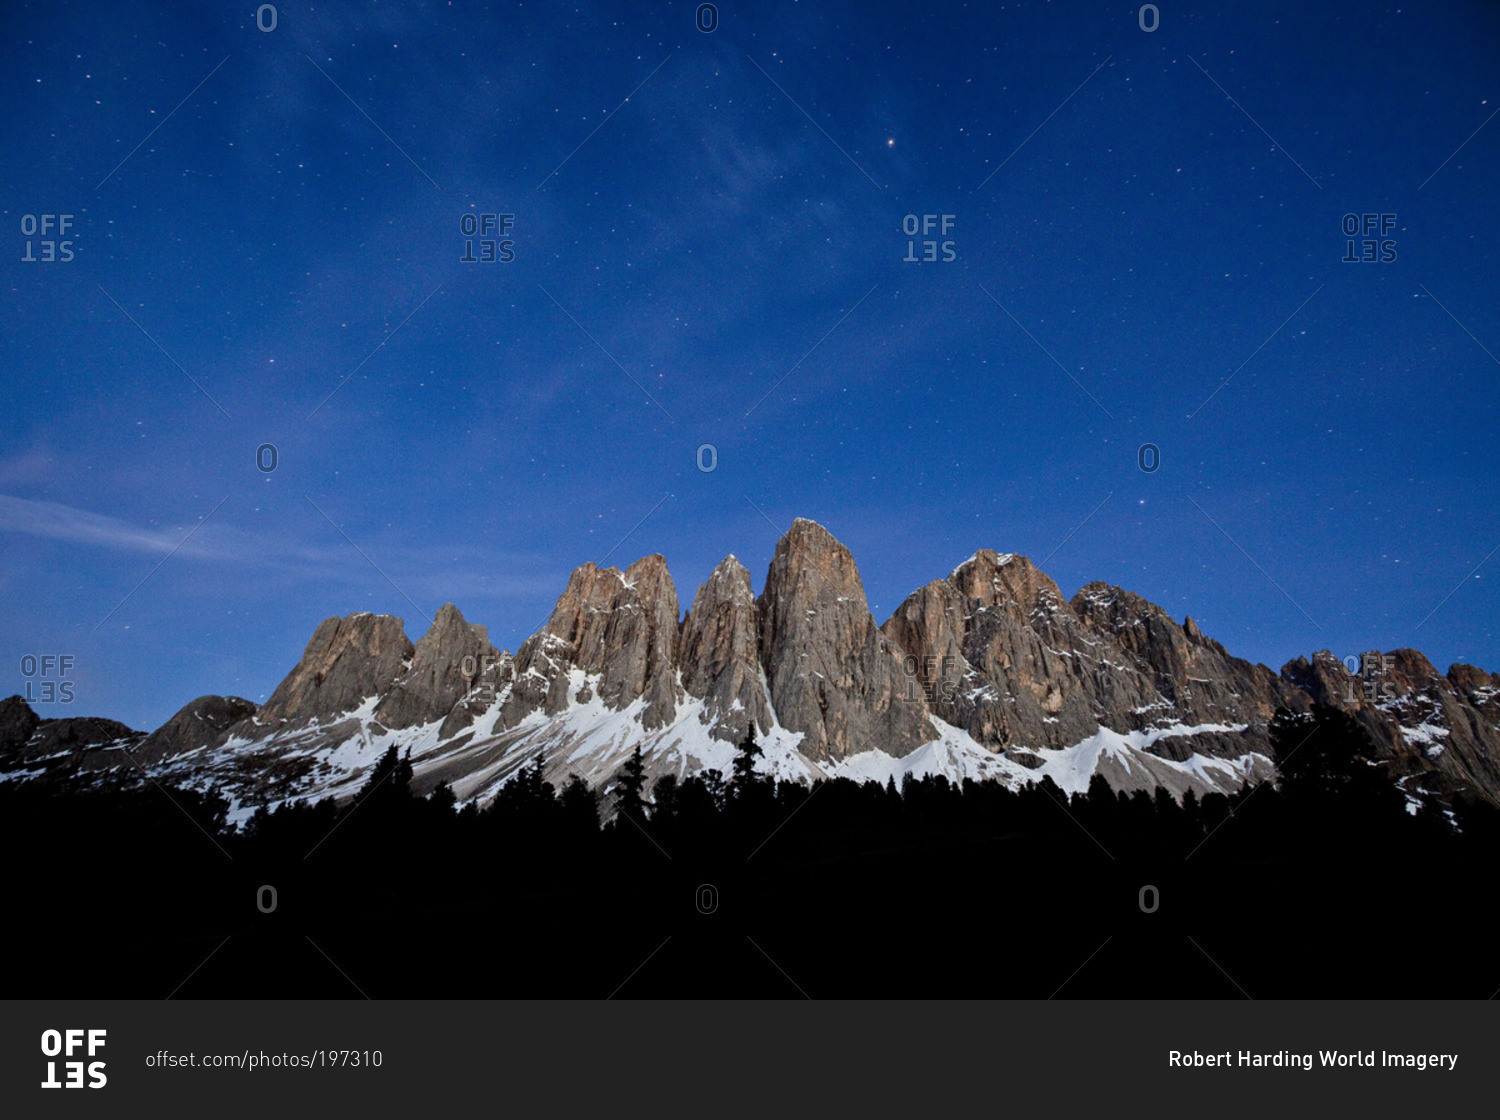 The starry sky above the Odle-Villnoss massif in South Tyrol, Italy